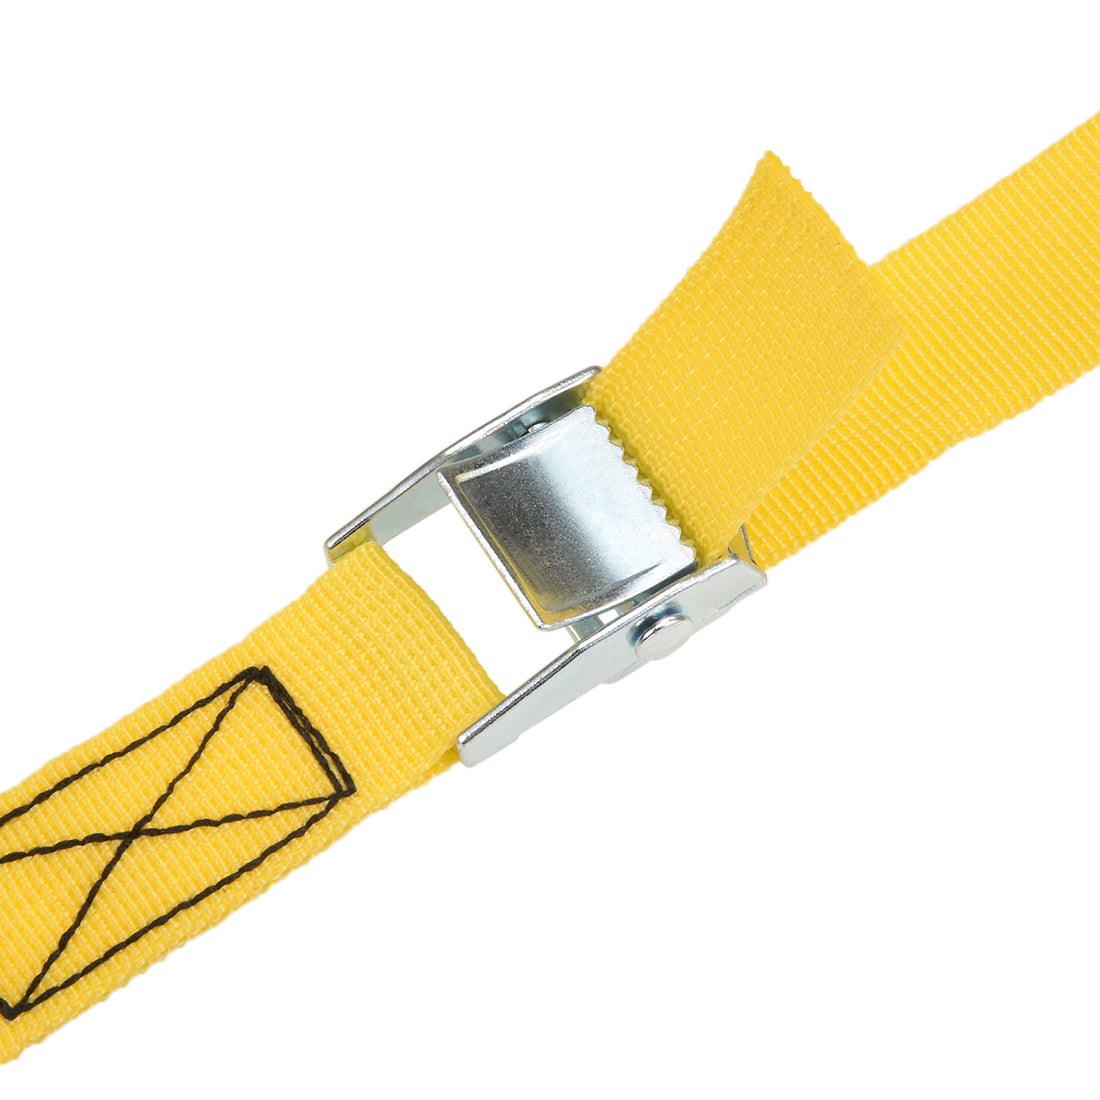 uxcell Uxcell 0.8M x 25mm Lashing Strap Cargo Tie Down Straps w Cam Lock Buckle 250Kg Work Load, Yellow, 4Pcs